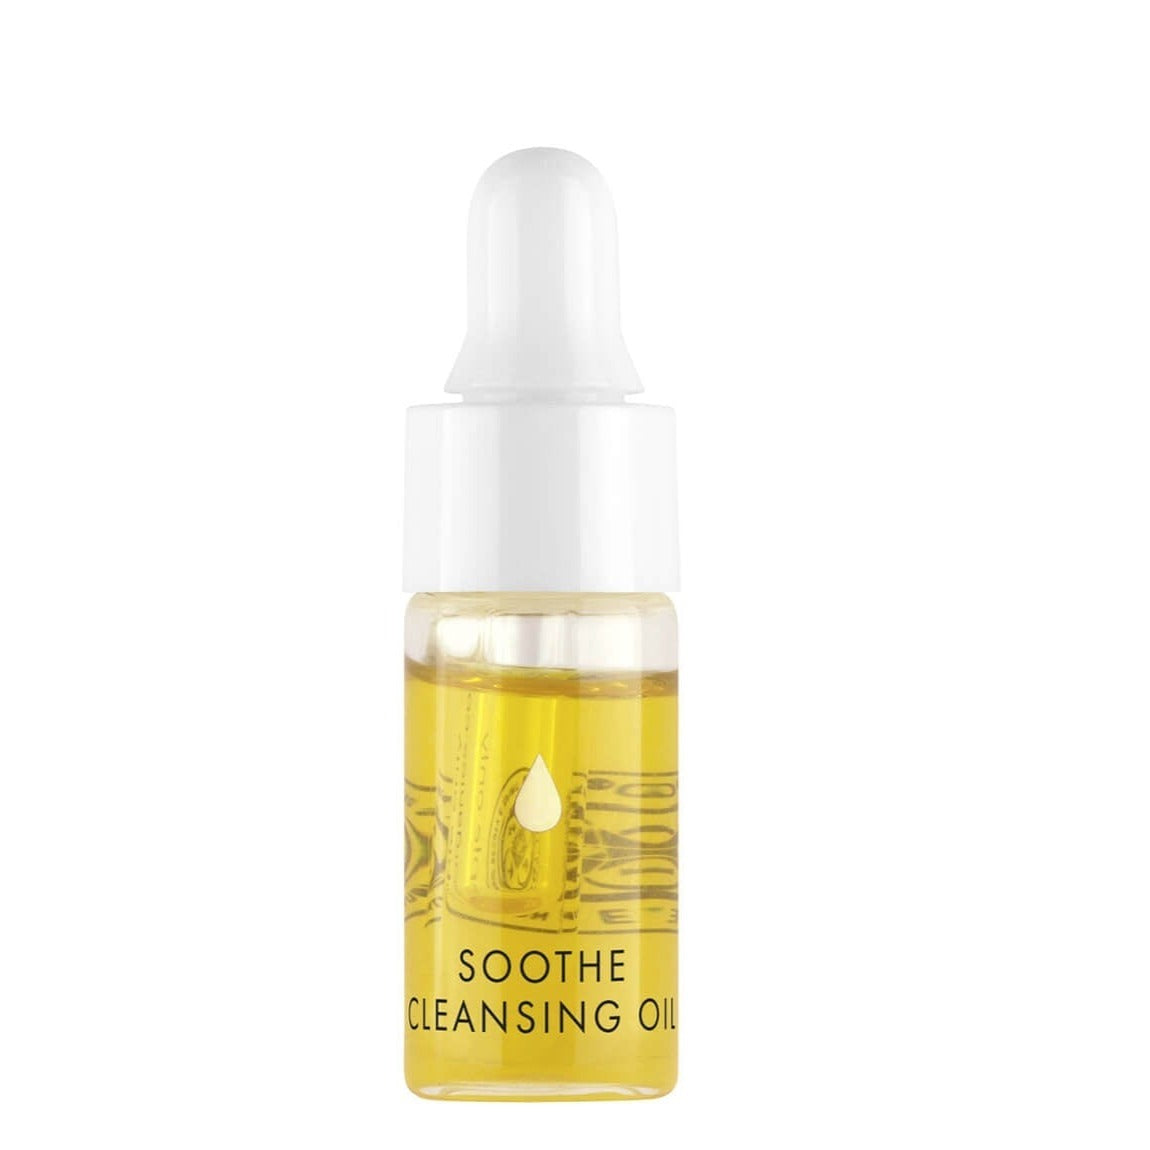 Soothe Cleansing Oil Sample Other Synthesis Organics 3ml